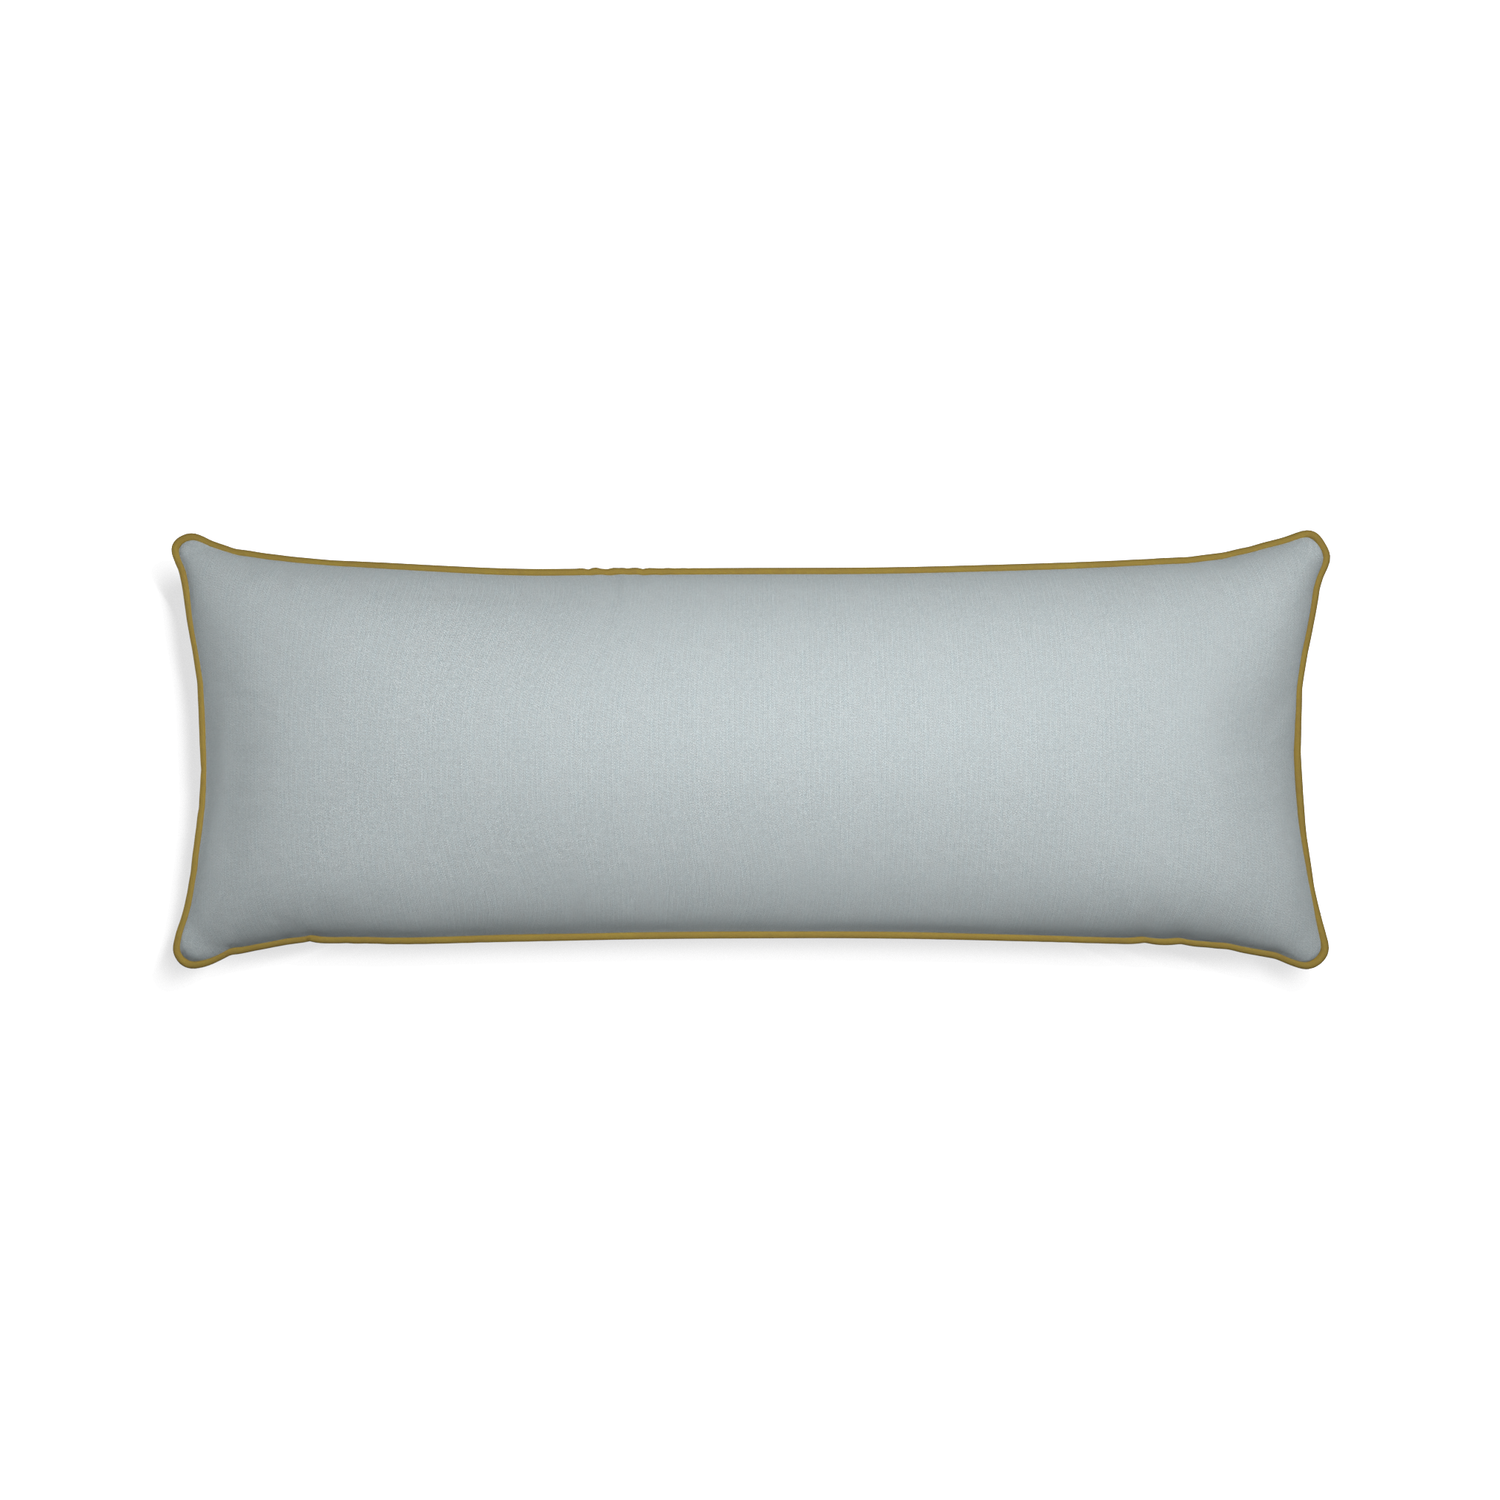 Xl-lumbar sea custom grey bluepillow with c piping on white background